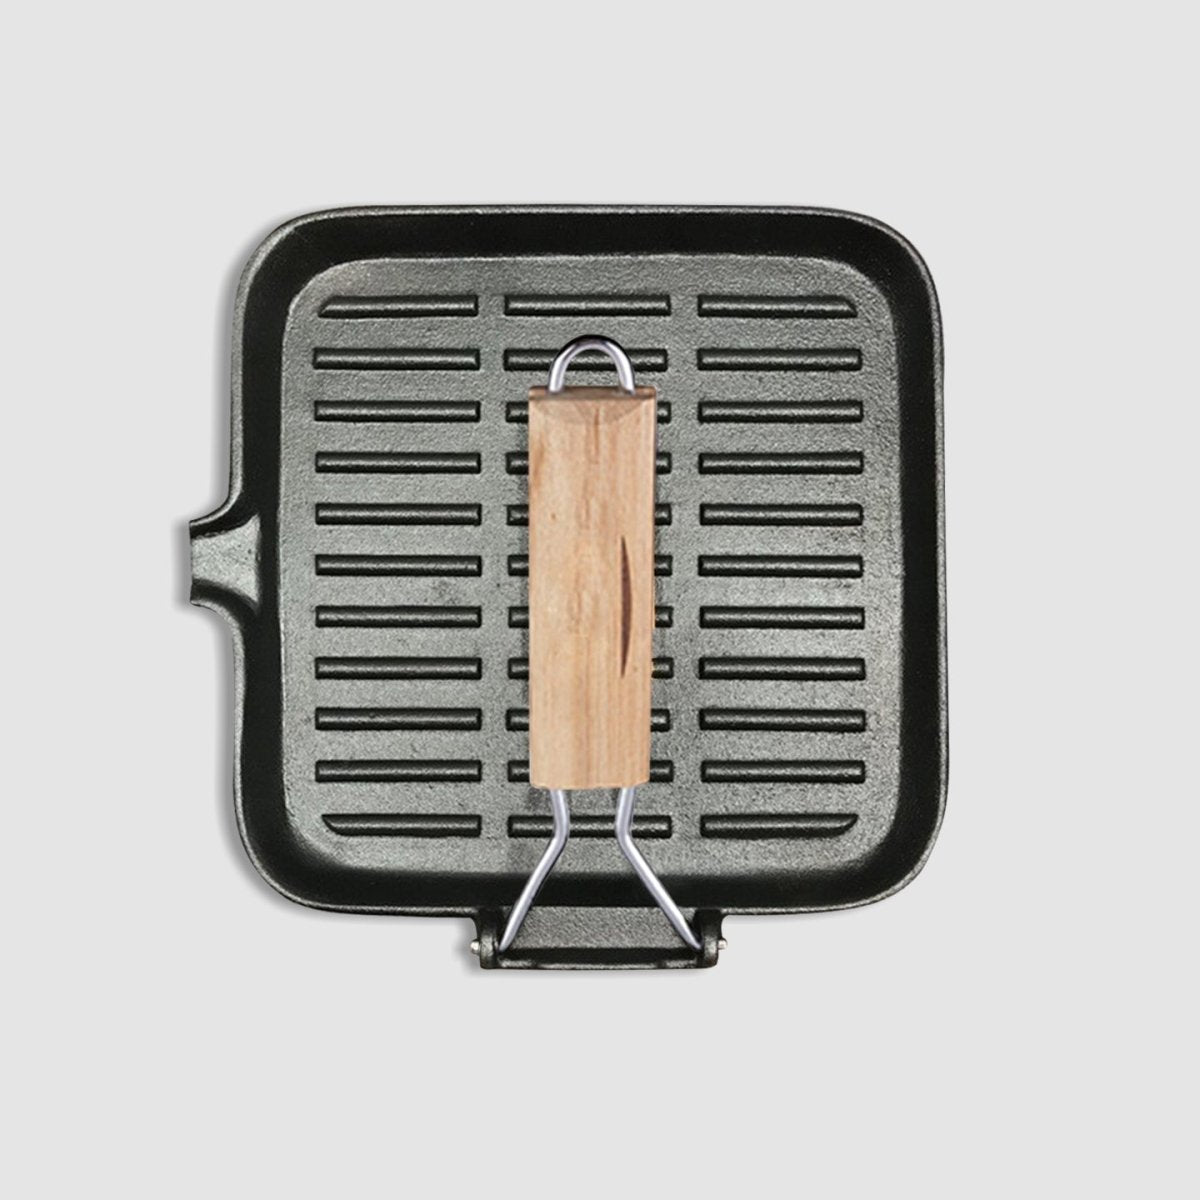 SOGA 2X 28cm Ribbed Cast Iron Square Steak Frying Grill Skillet Pan with Folding Wooden Handle - Outdoorium